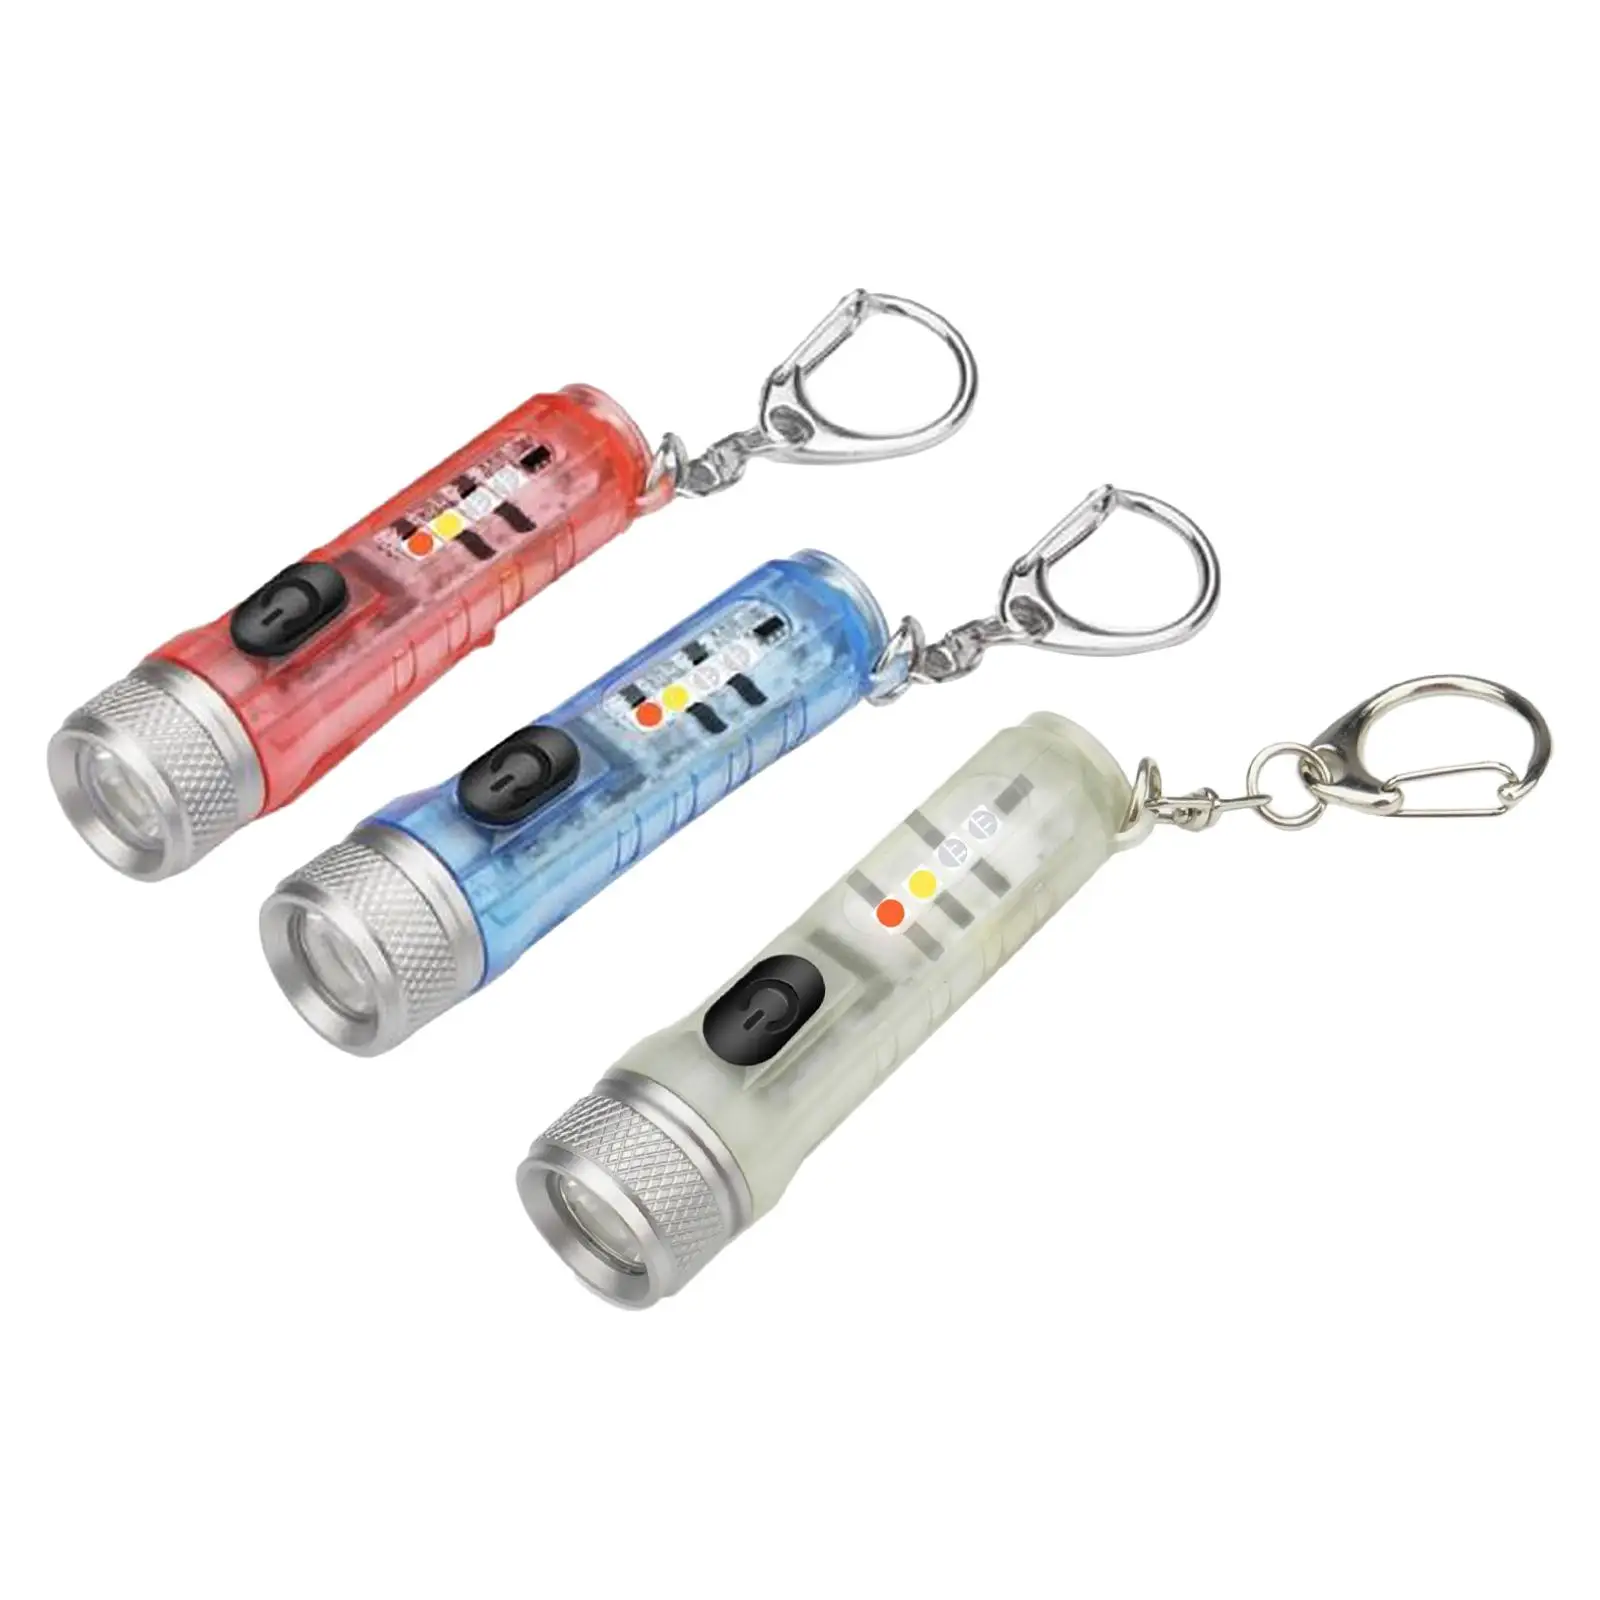 Portable Mini LED Flashlight USB Rechargeable Pocket Light LED Work Light Torch Small flashlights for Outdoor Hiking Backpacking